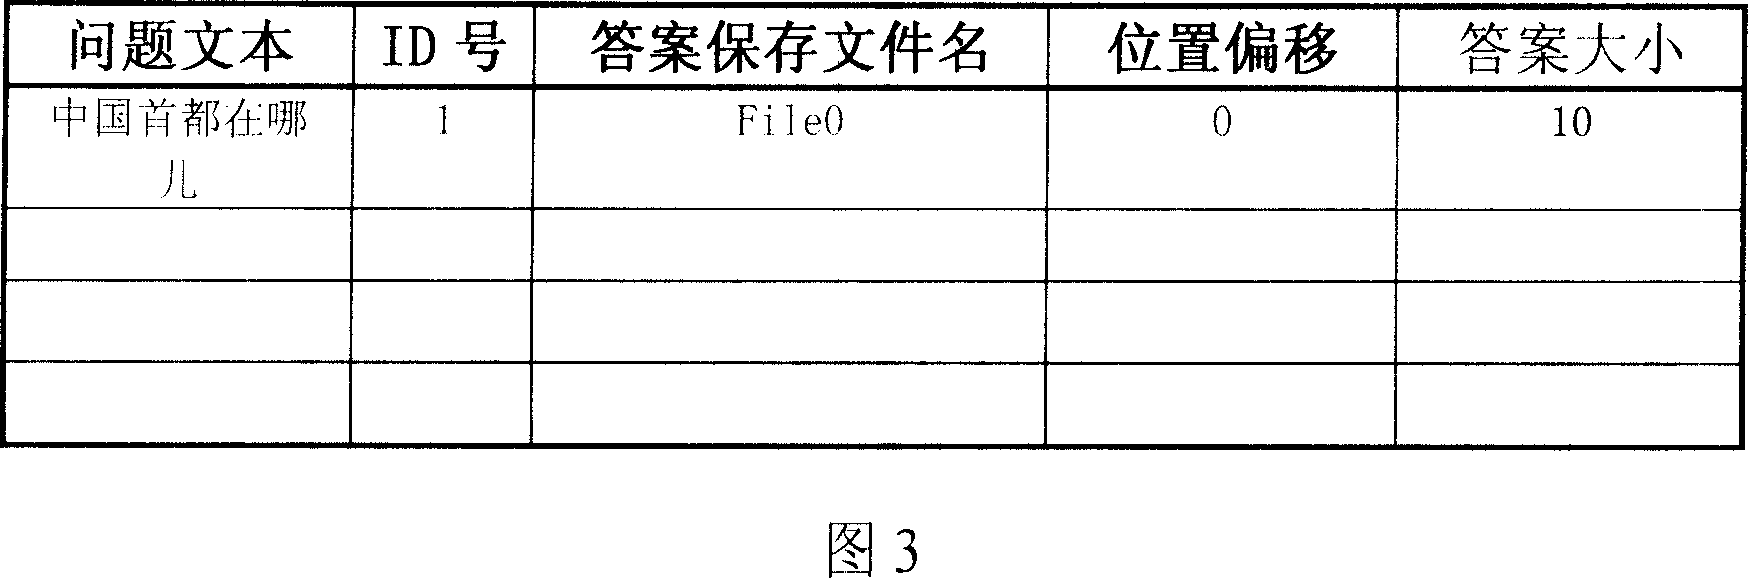 FAQ based Chinese natural language ask and answer method